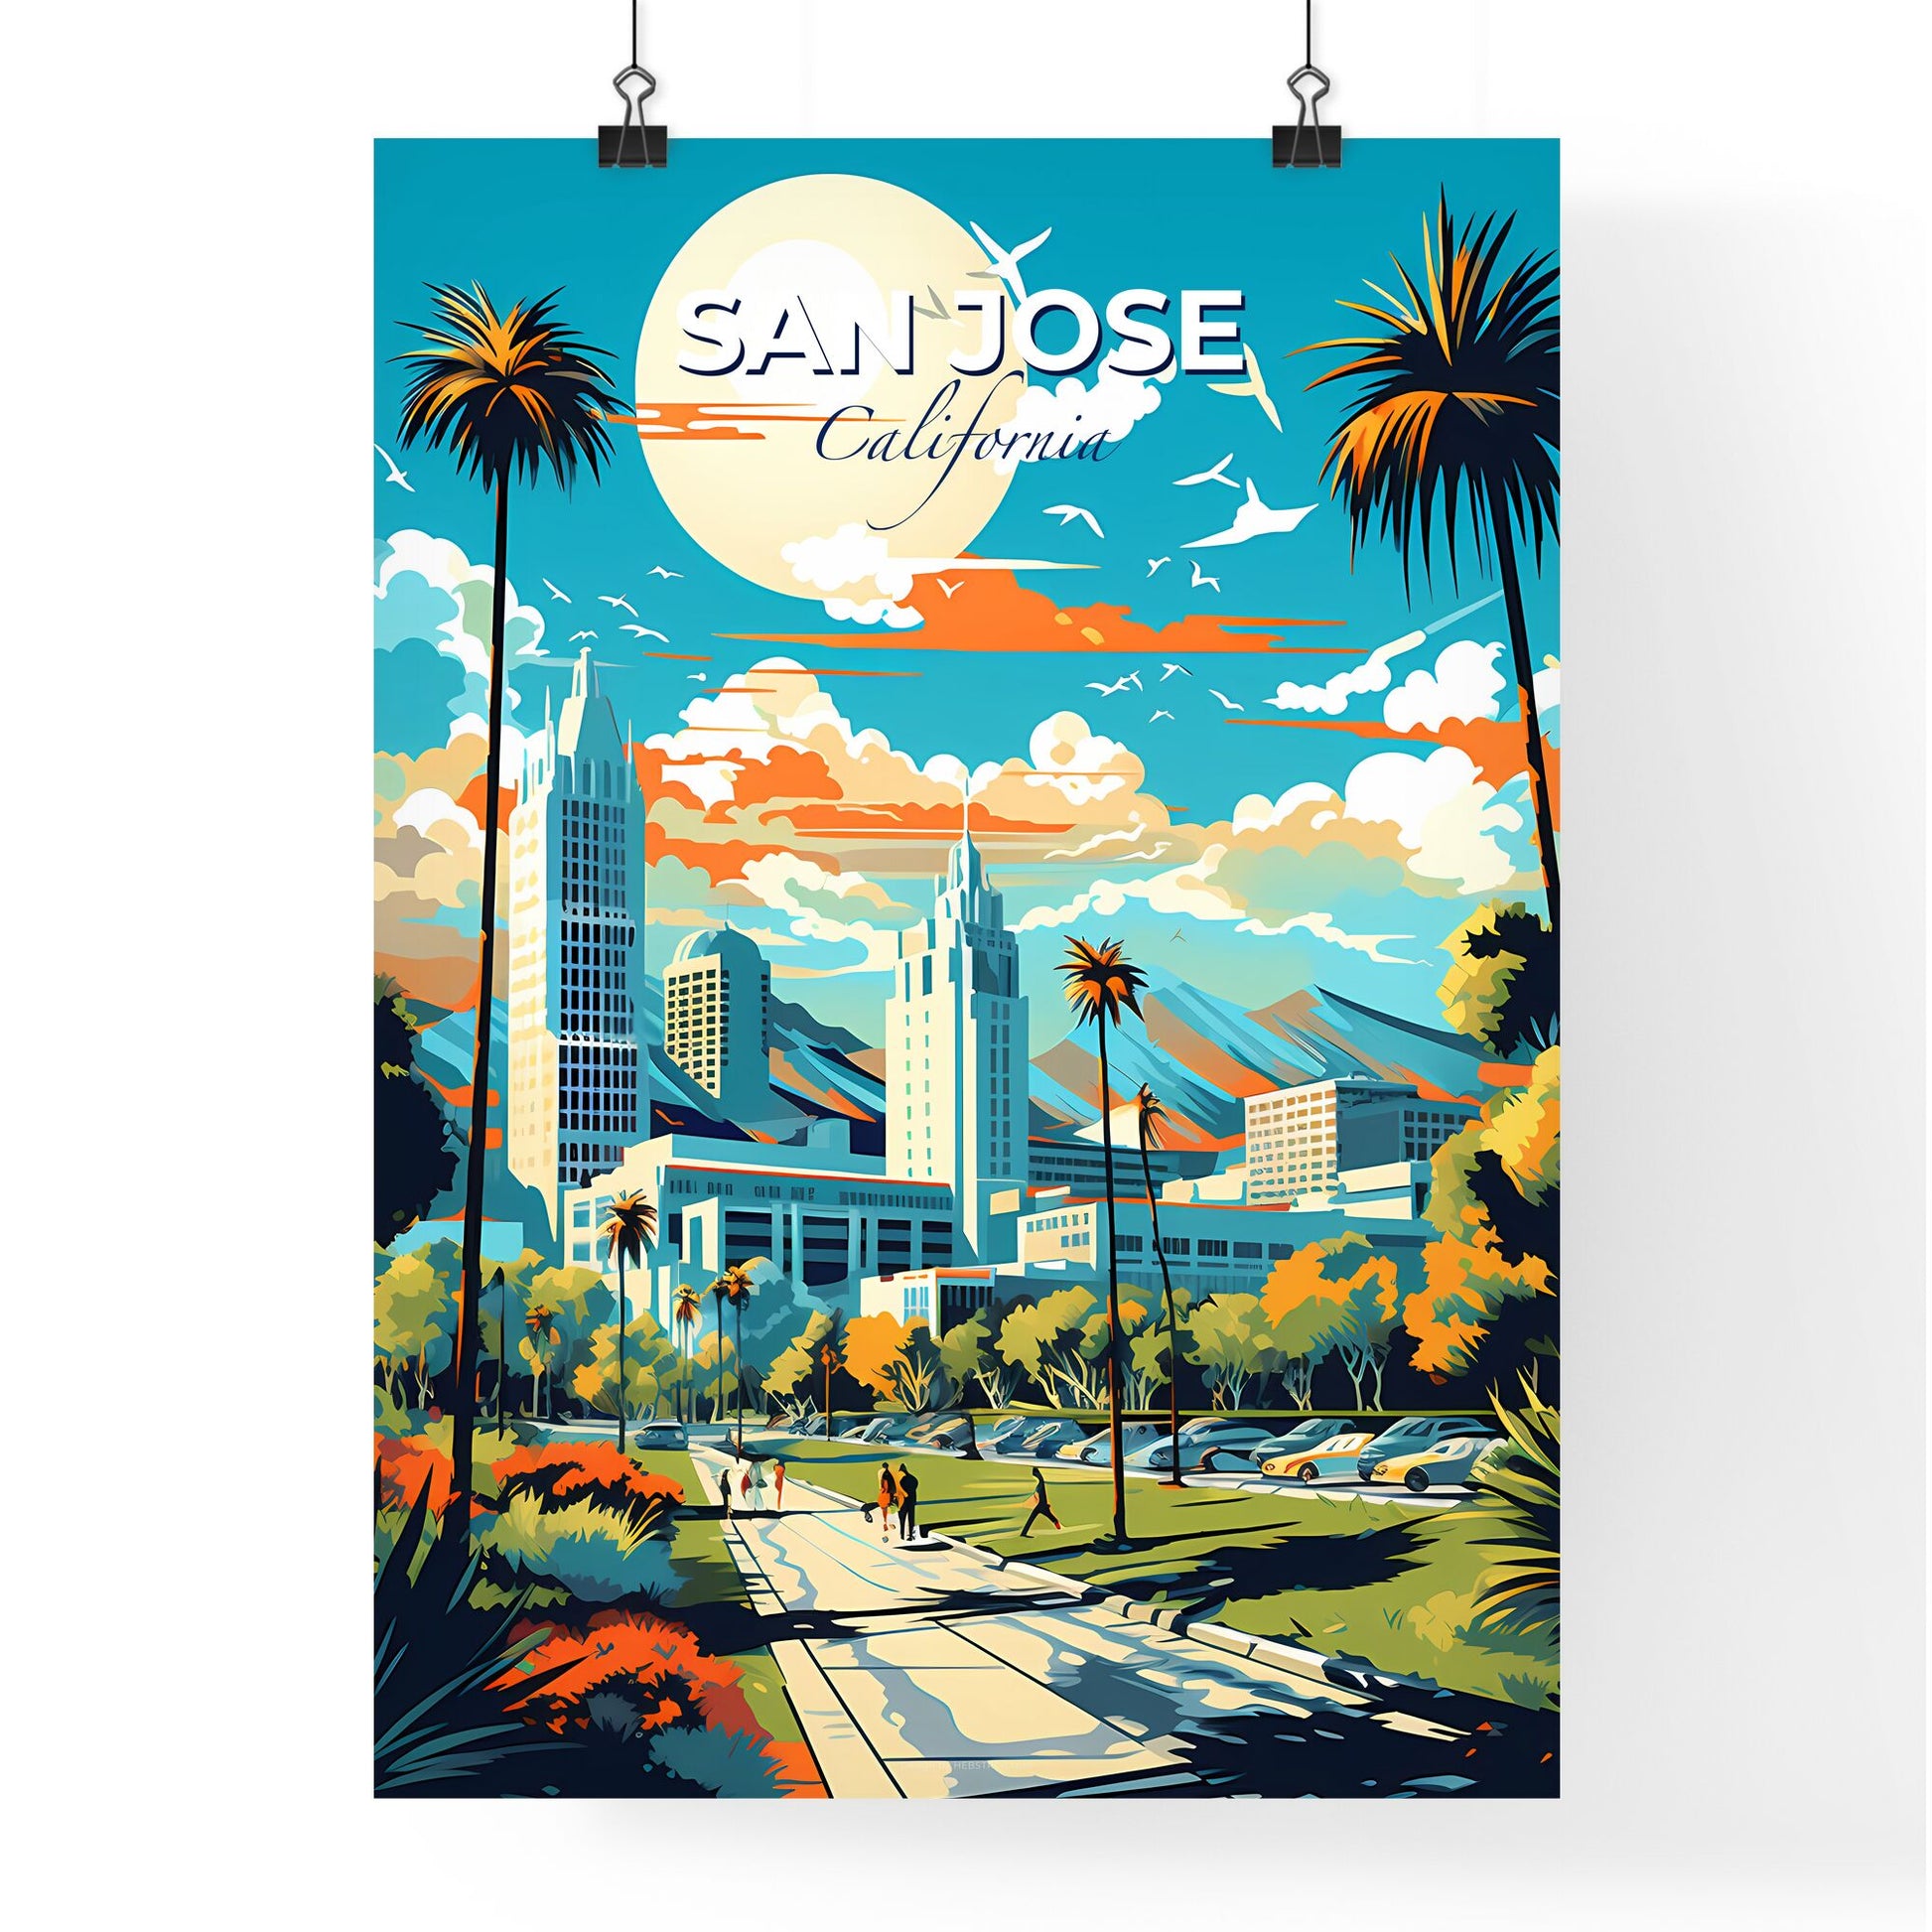 San Jose California Skyline - A City Landscape With Trees And Buildings - Customizable Travel Gift Default Title